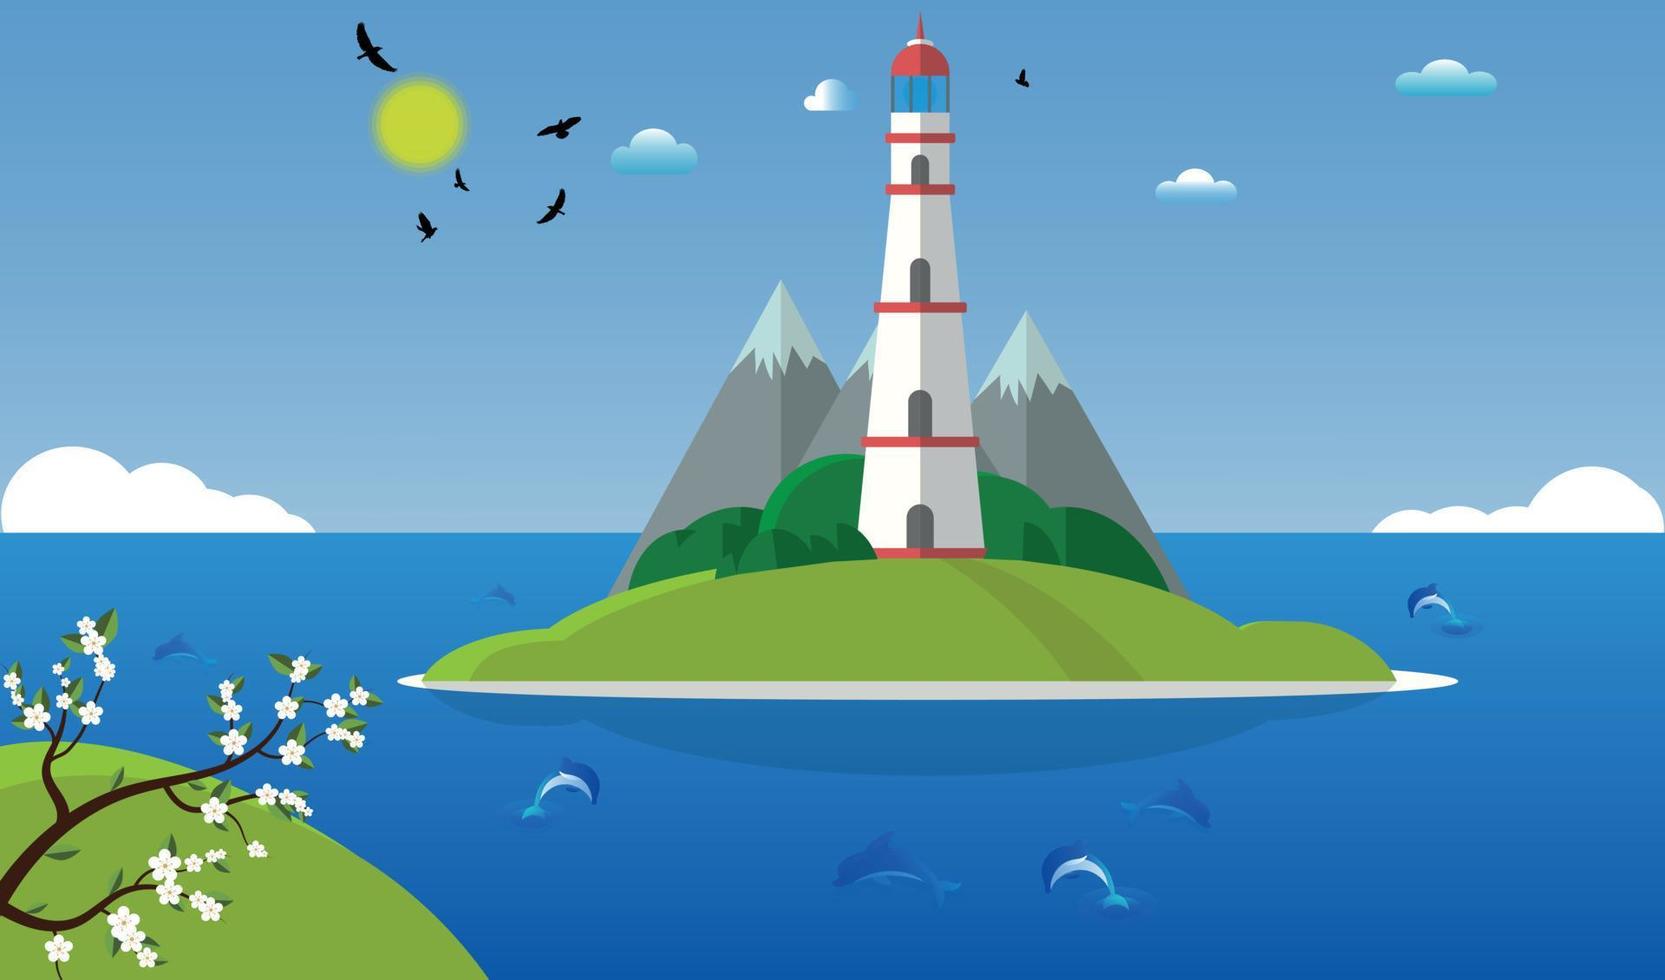 Lighthouse flat vector illustration on the coastal line, isolated tropical island in the ocean.